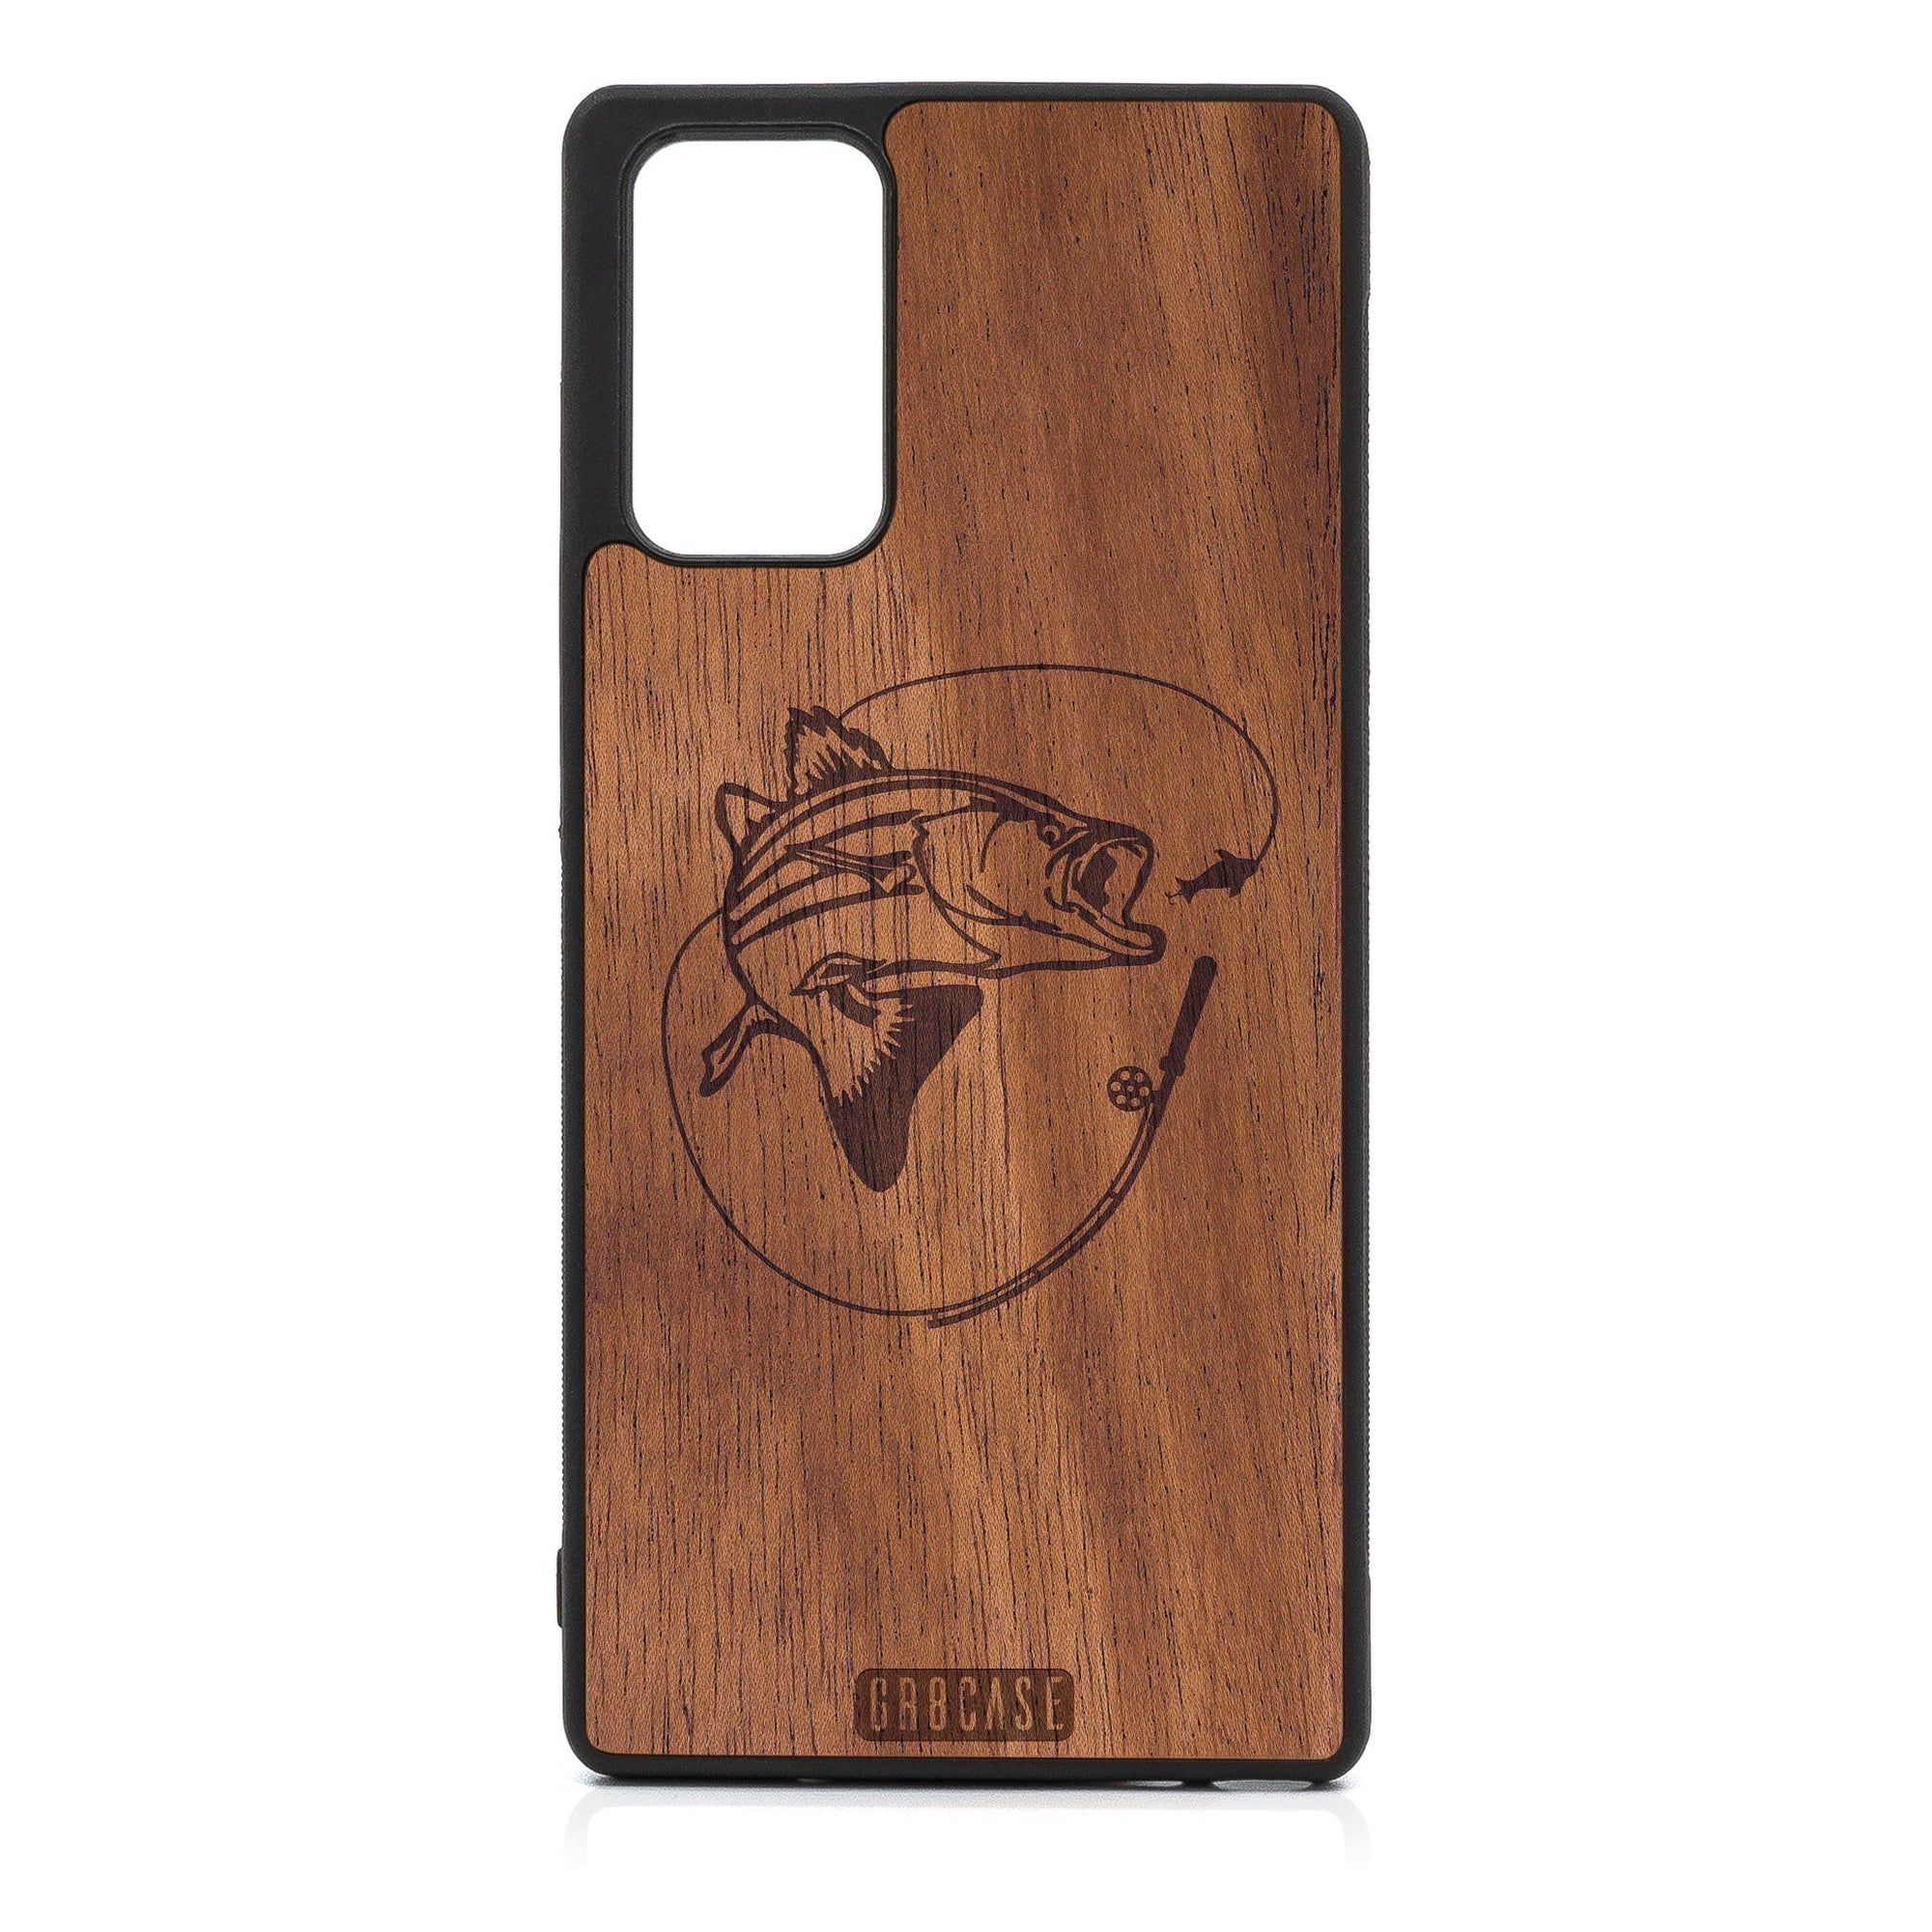 Fish and Reel Design Wood Case For Samsung Galaxy A72 5G